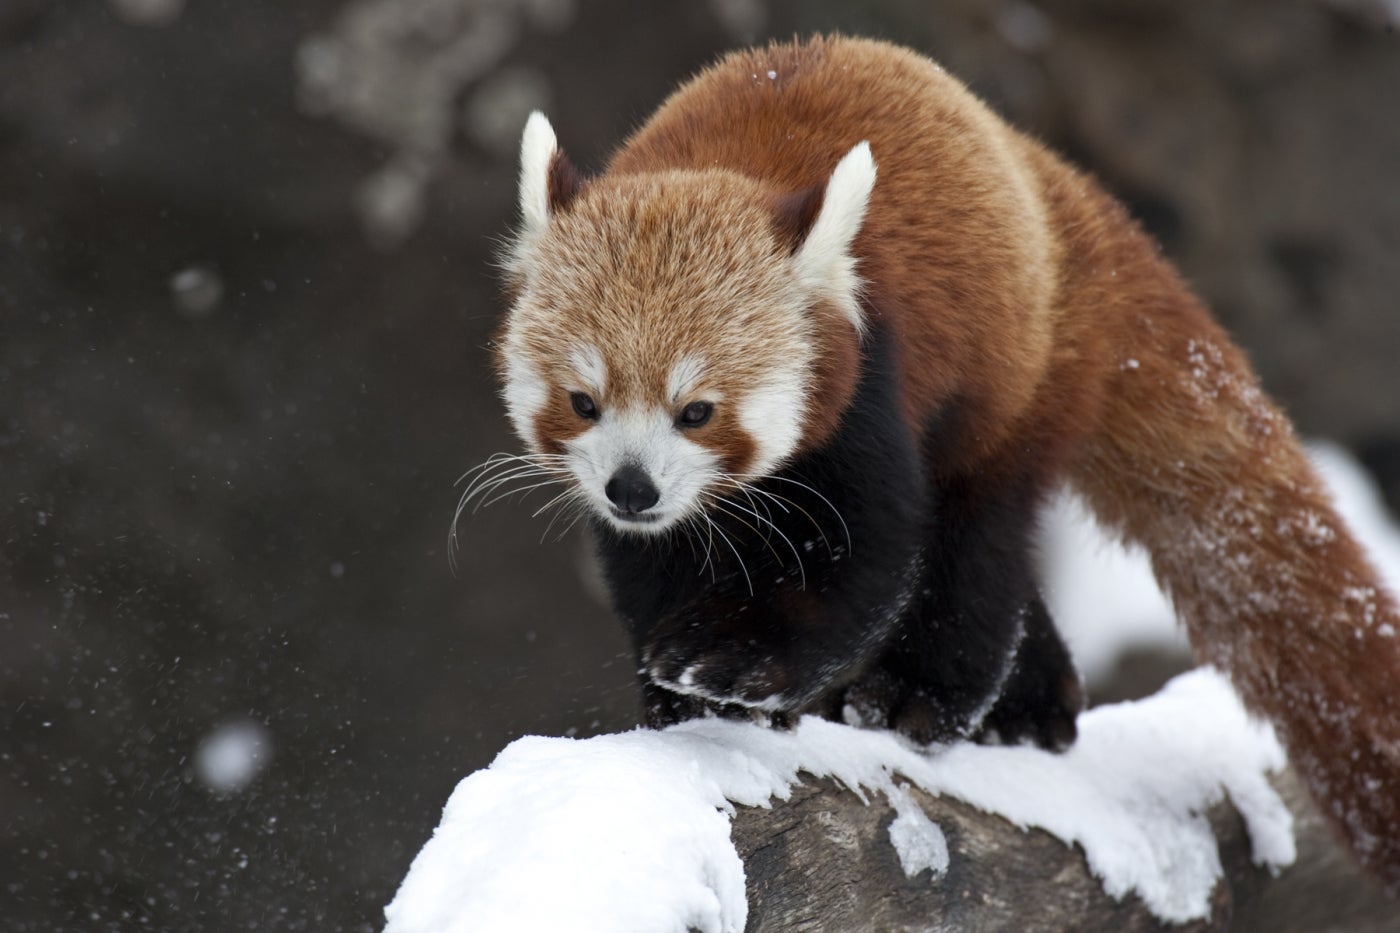 A red panda with thick  fur, long whiskers, claws and a long, furry tail walks across a snow-covered branch